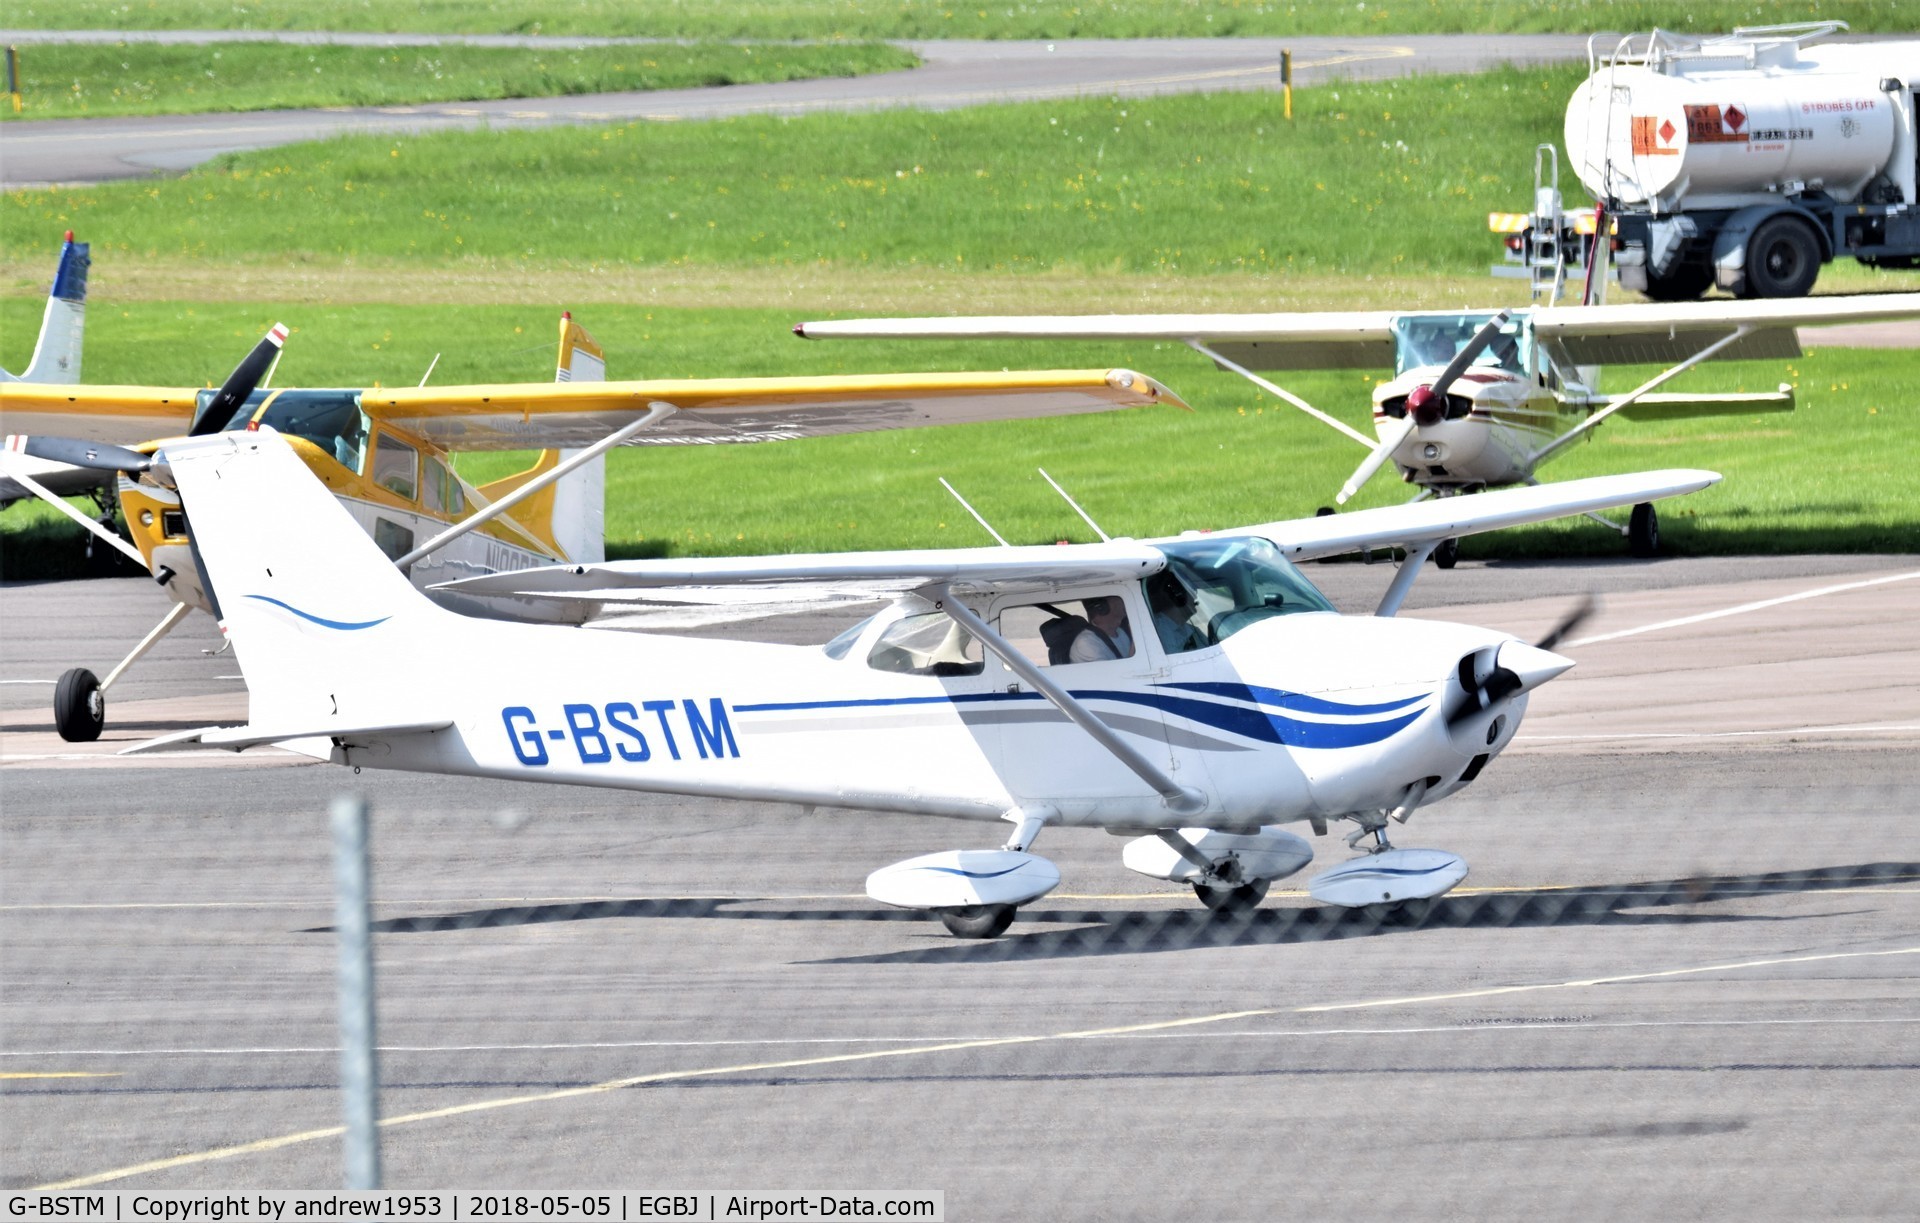 G-BSTM, 1972 Cessna 172L C/N 172-60143, G-BSTM at Gloucestershire Airport.